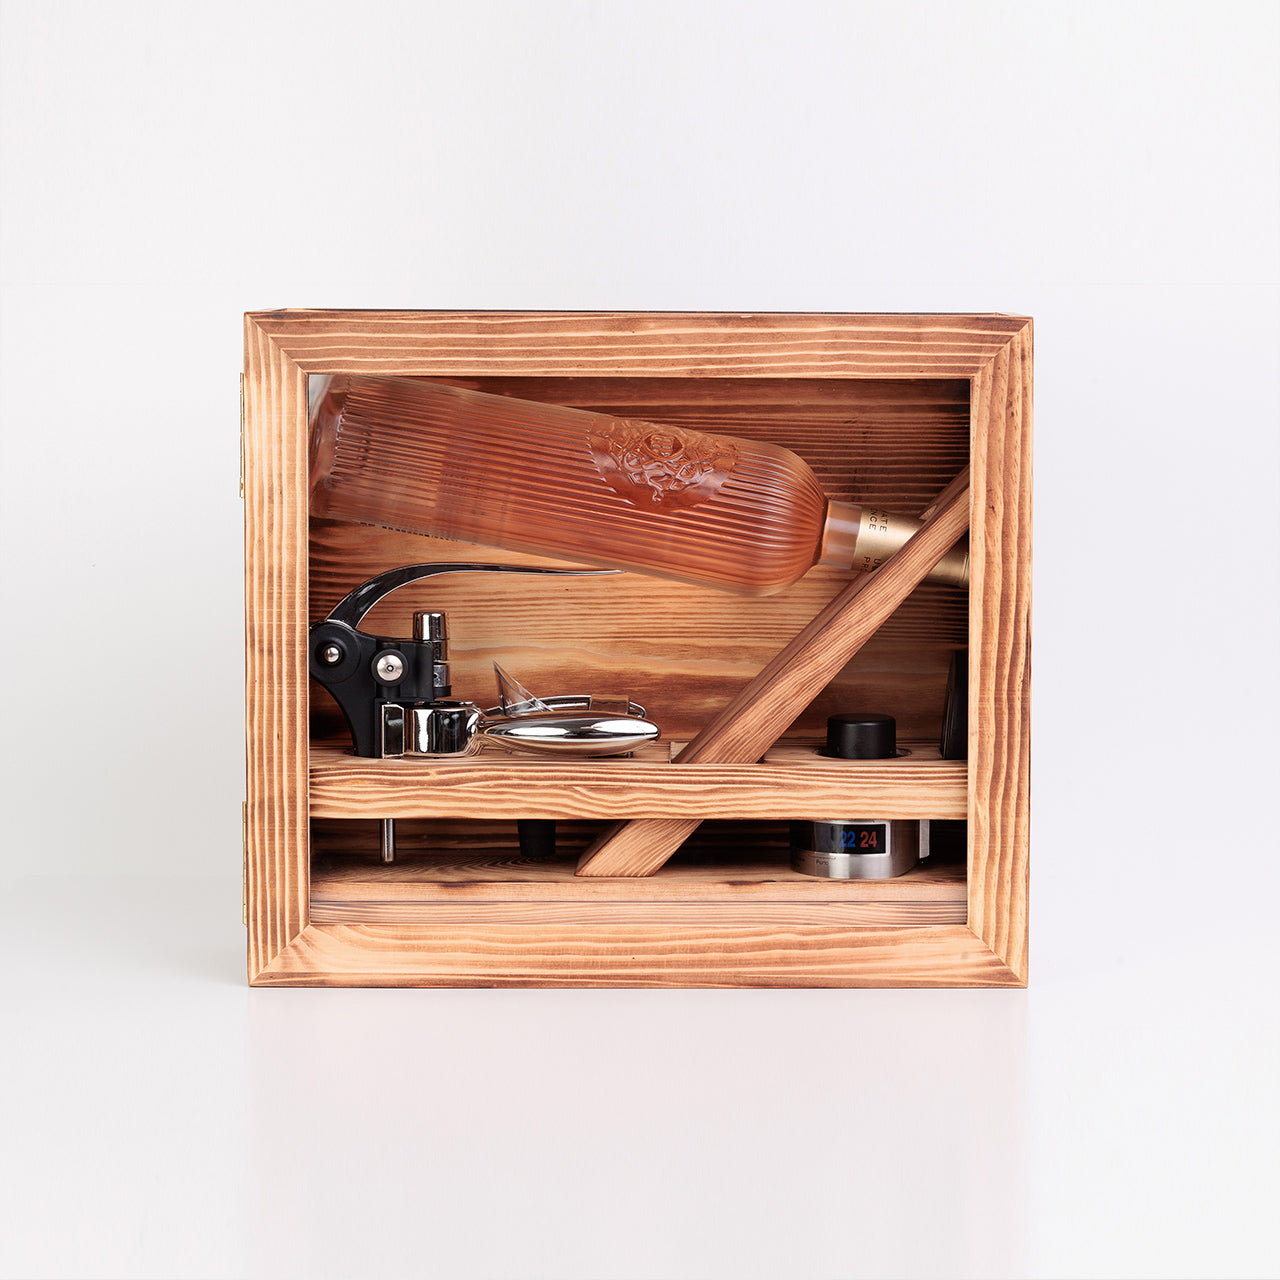 WineBox - Luxurious and complete wine set for wine lovers